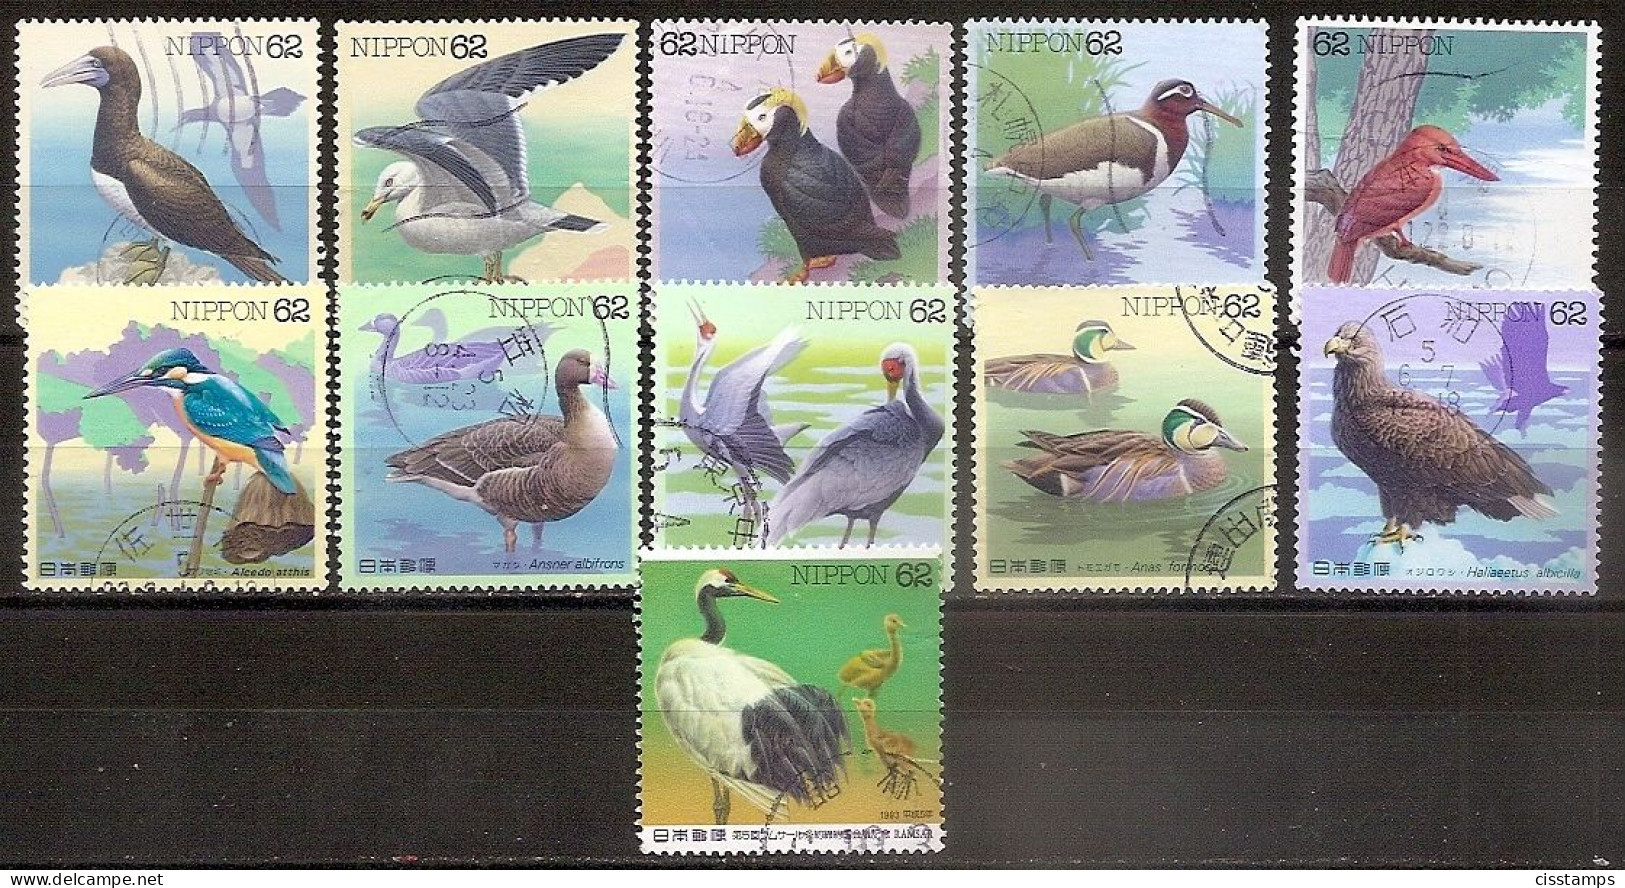 Japan 1991-1993●Birds●Lot Of 11 Cancelled Stamps - Usati